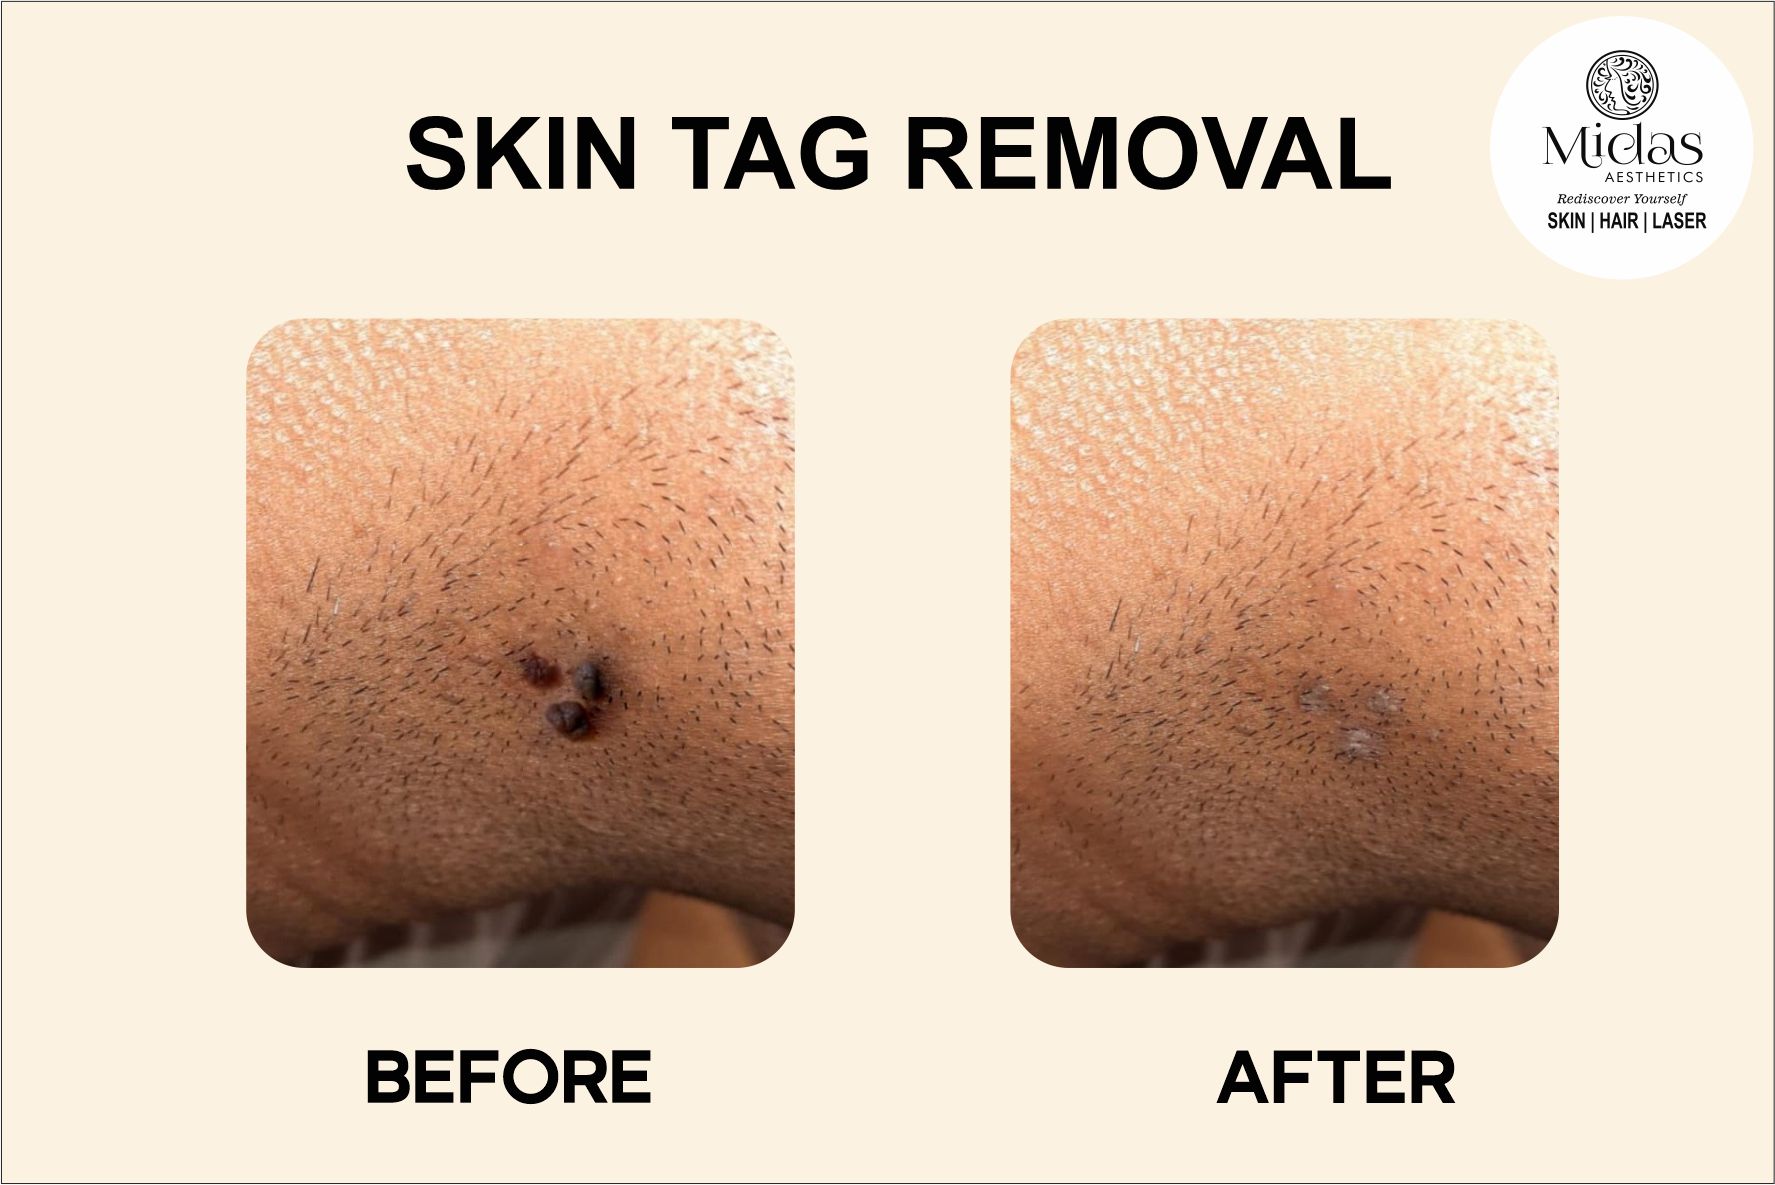 SKIN TAG Removal before and after images